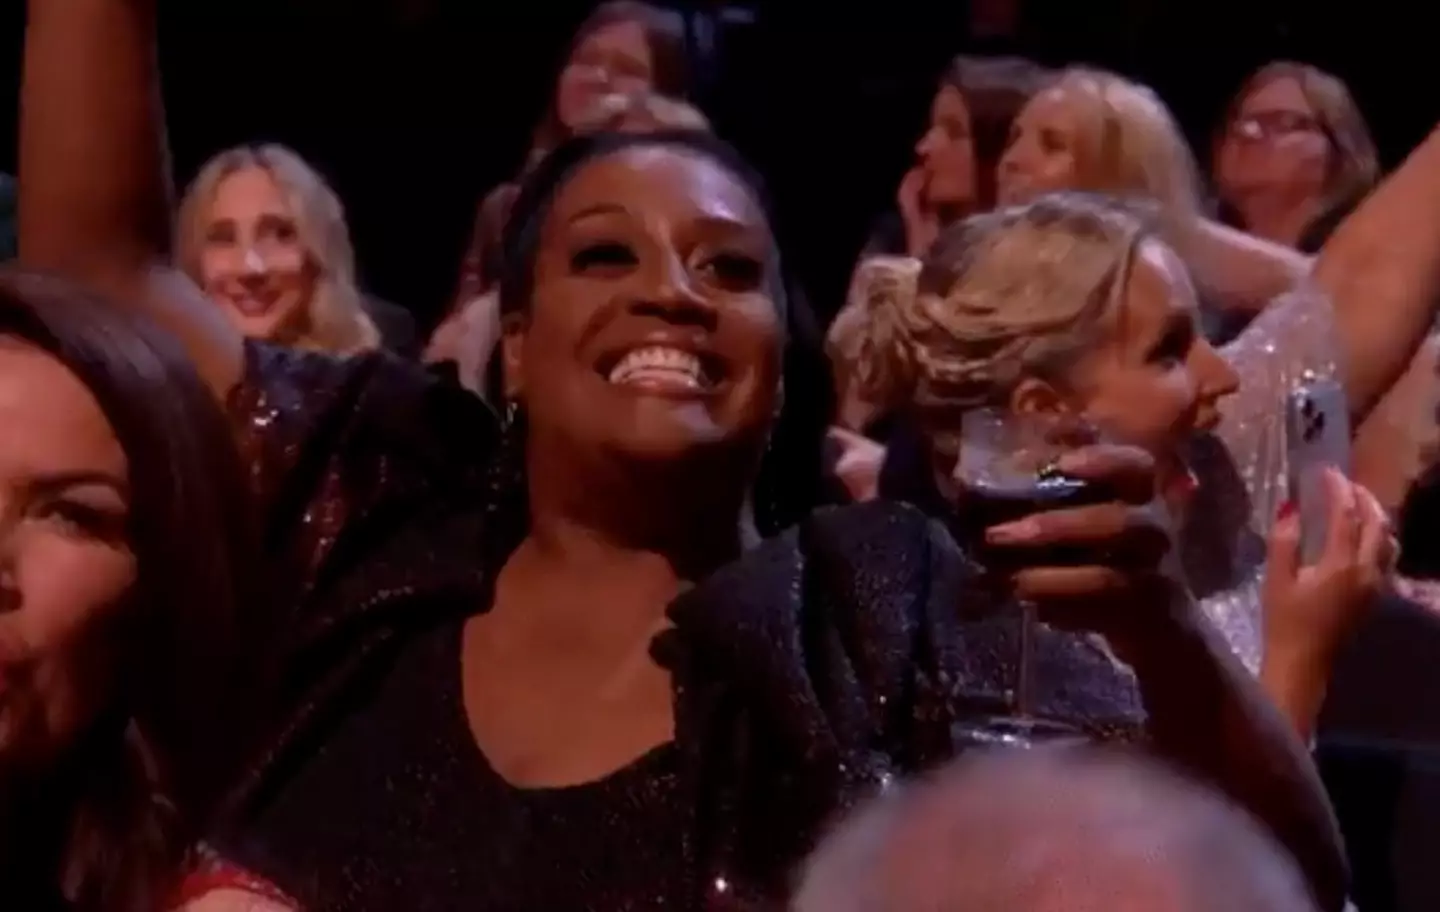 Alison Hammond spilled her wine whilst on live TV at the NTAs.